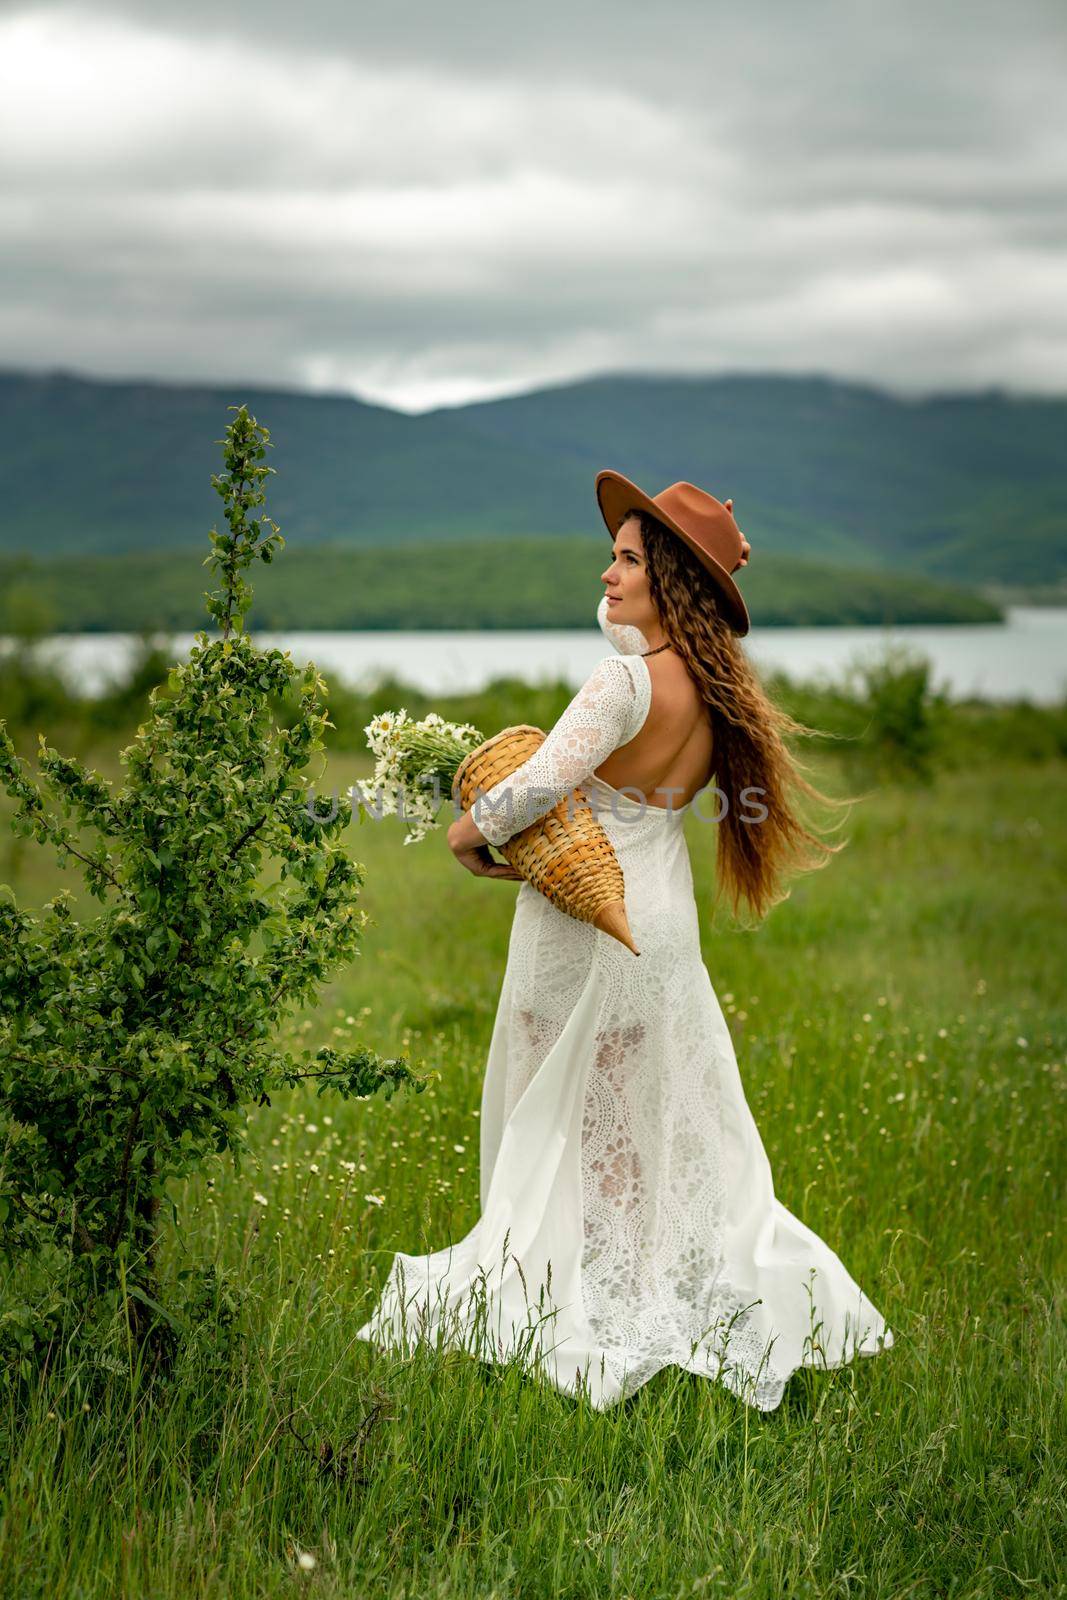 A middle-aged woman in a white dress and brown hat stands with her back on a green field and holds a basket in her hands with a large bouquet of daisies. In the background there are mountains and a lake